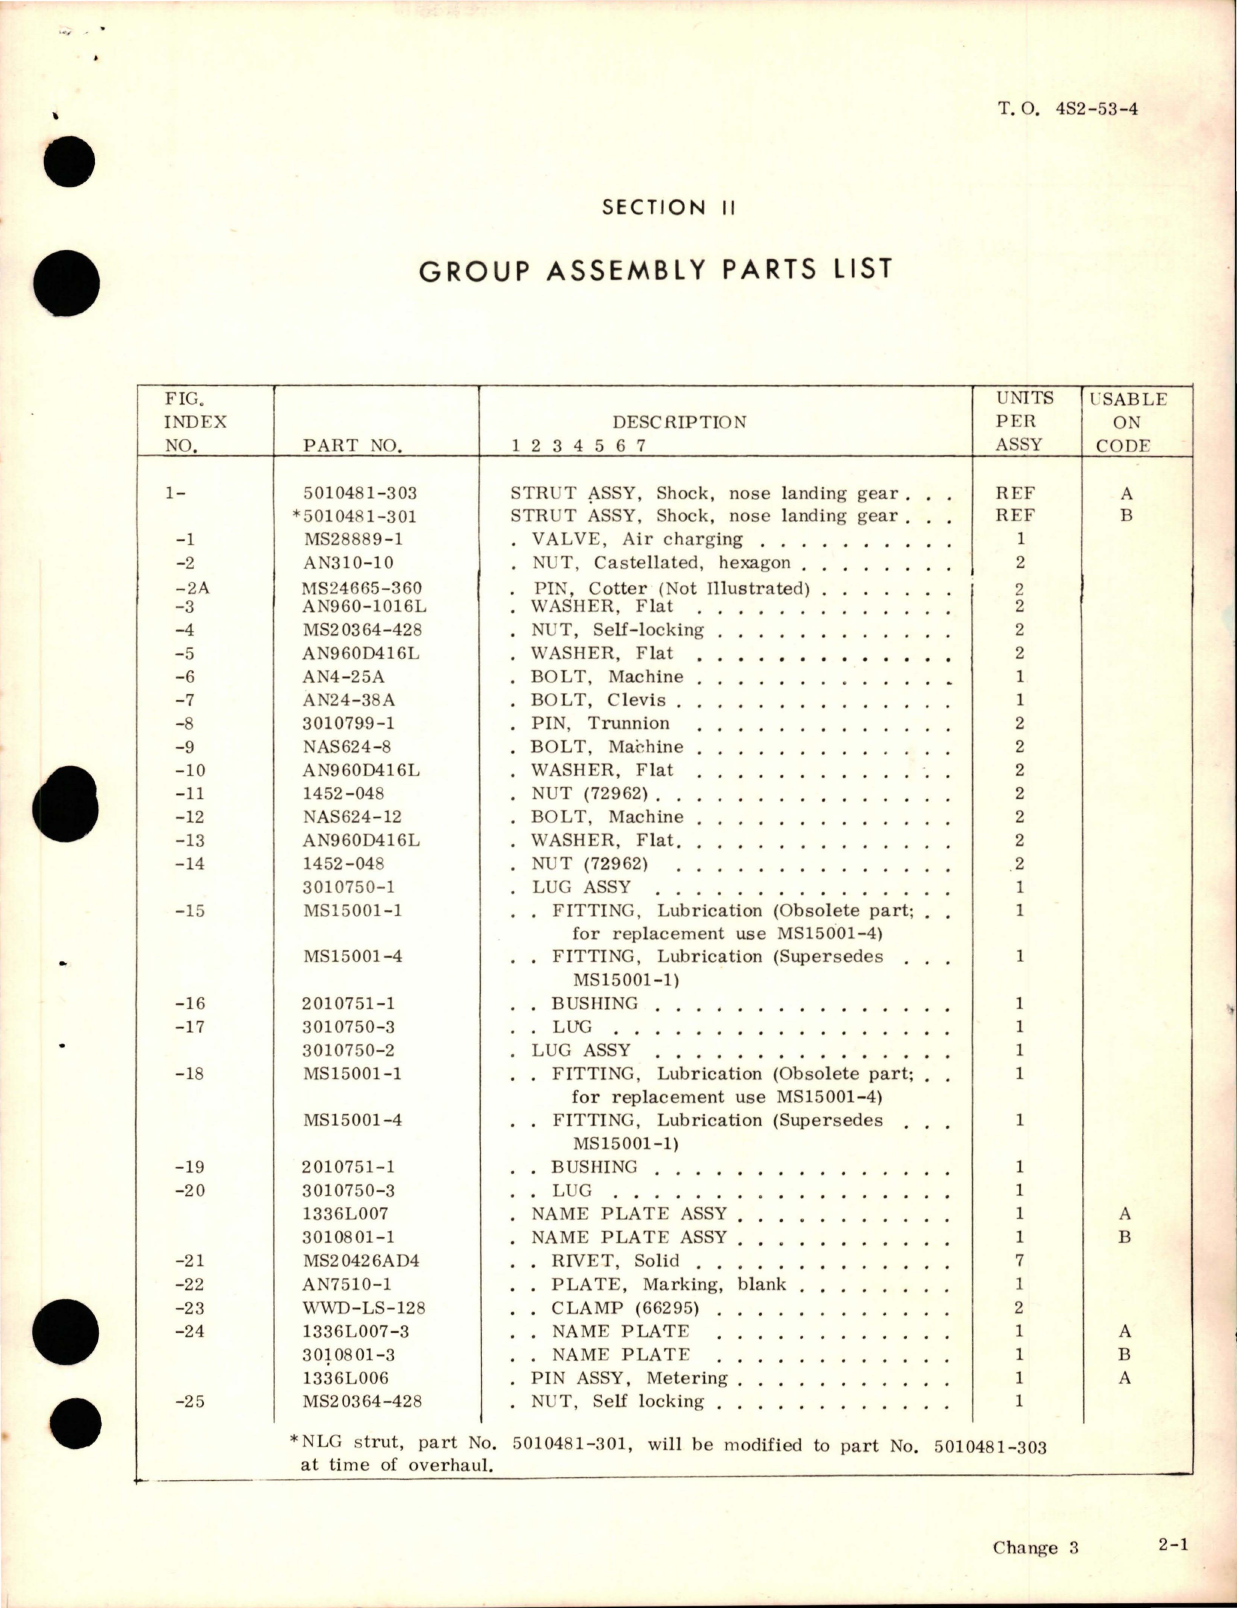 Sample page 7 from AirCorps Library document: Illustrated Parts Breakdown for Nose Landing Gear Shock Strut Assembly - Parts 5010481-301 and 5010481-303 